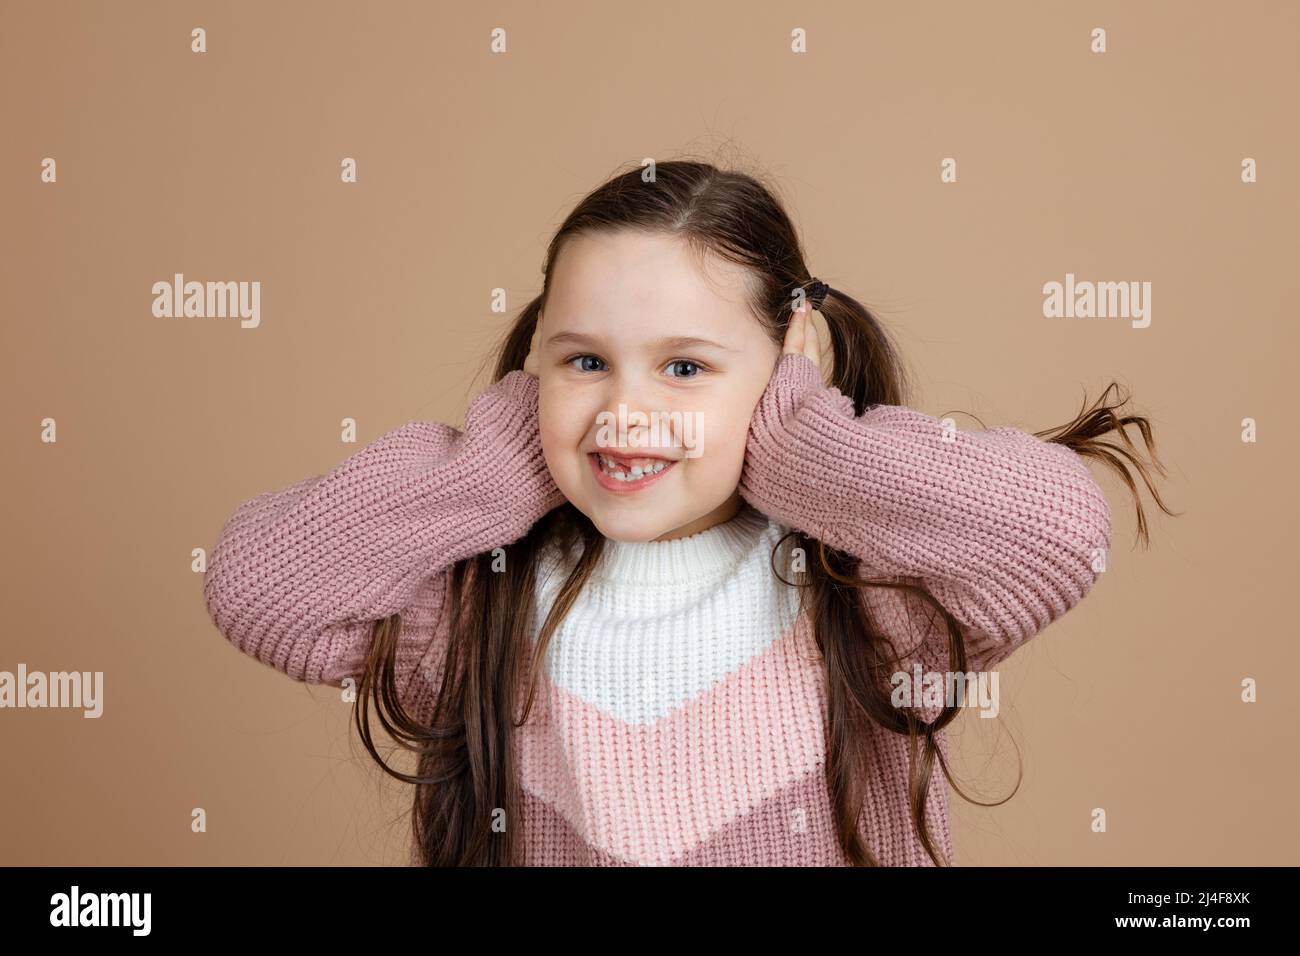 Portrait of young awesome pretty smiling girl with long dark hair in white, pink sweater standing, covering ears with hands, posing.  Stock Photo